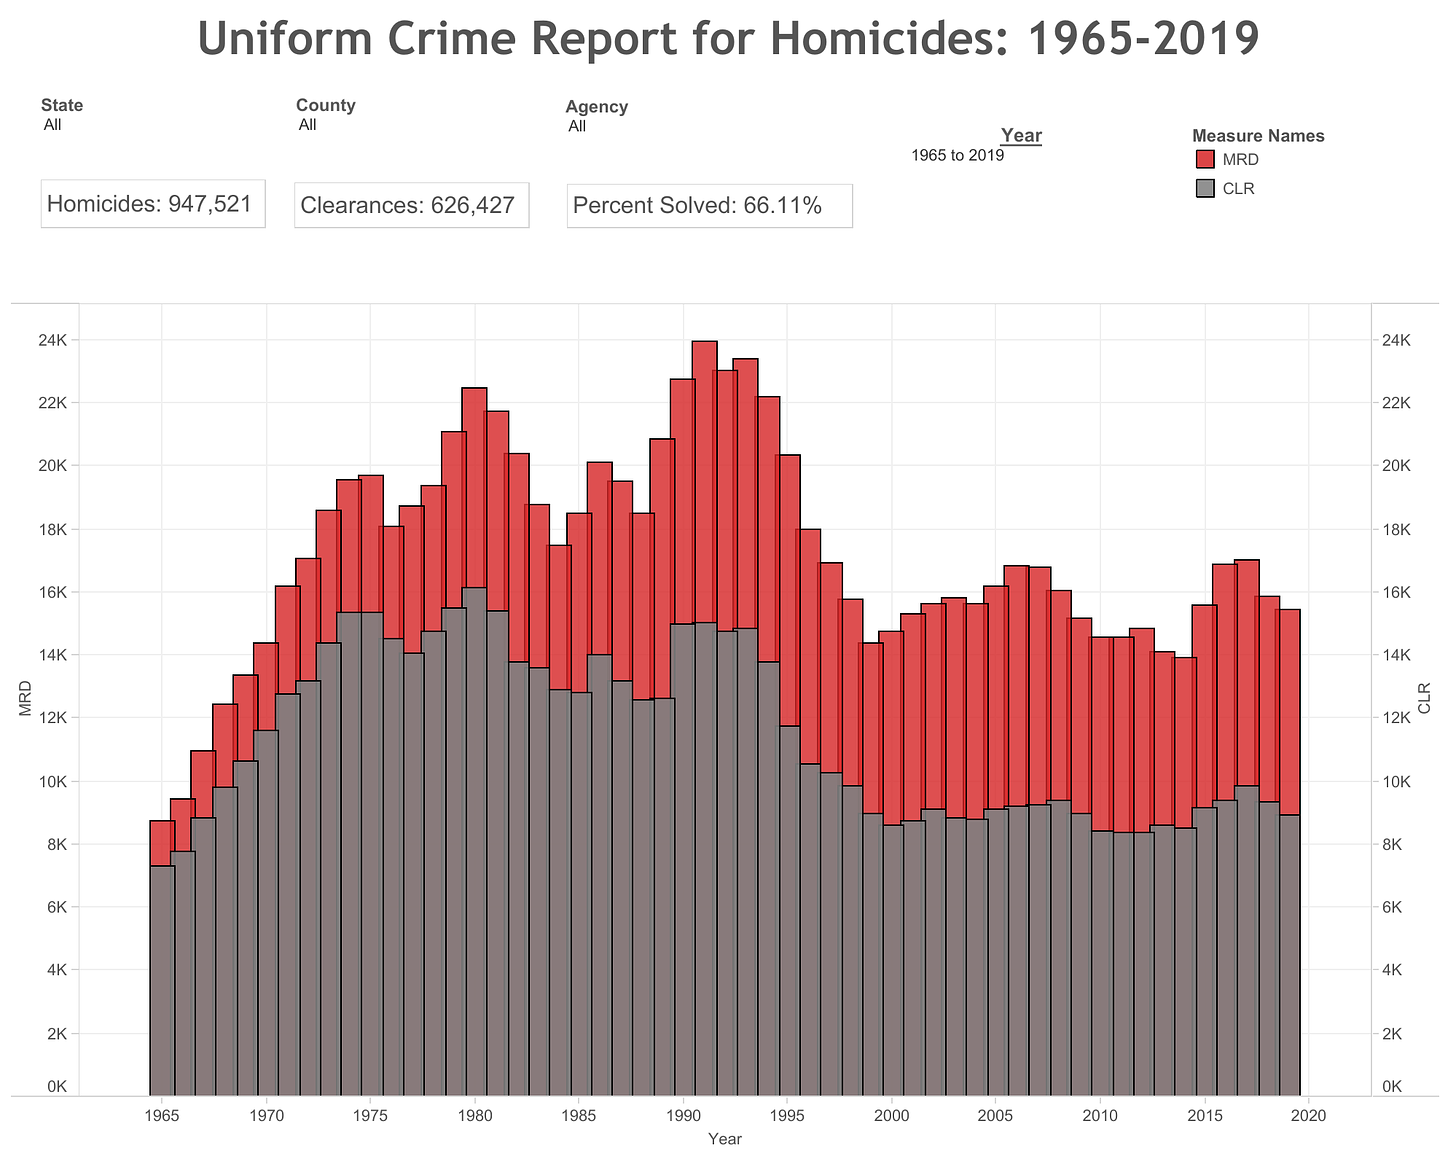 graph showing a uniform crime report for homicides from 1965 to 2020